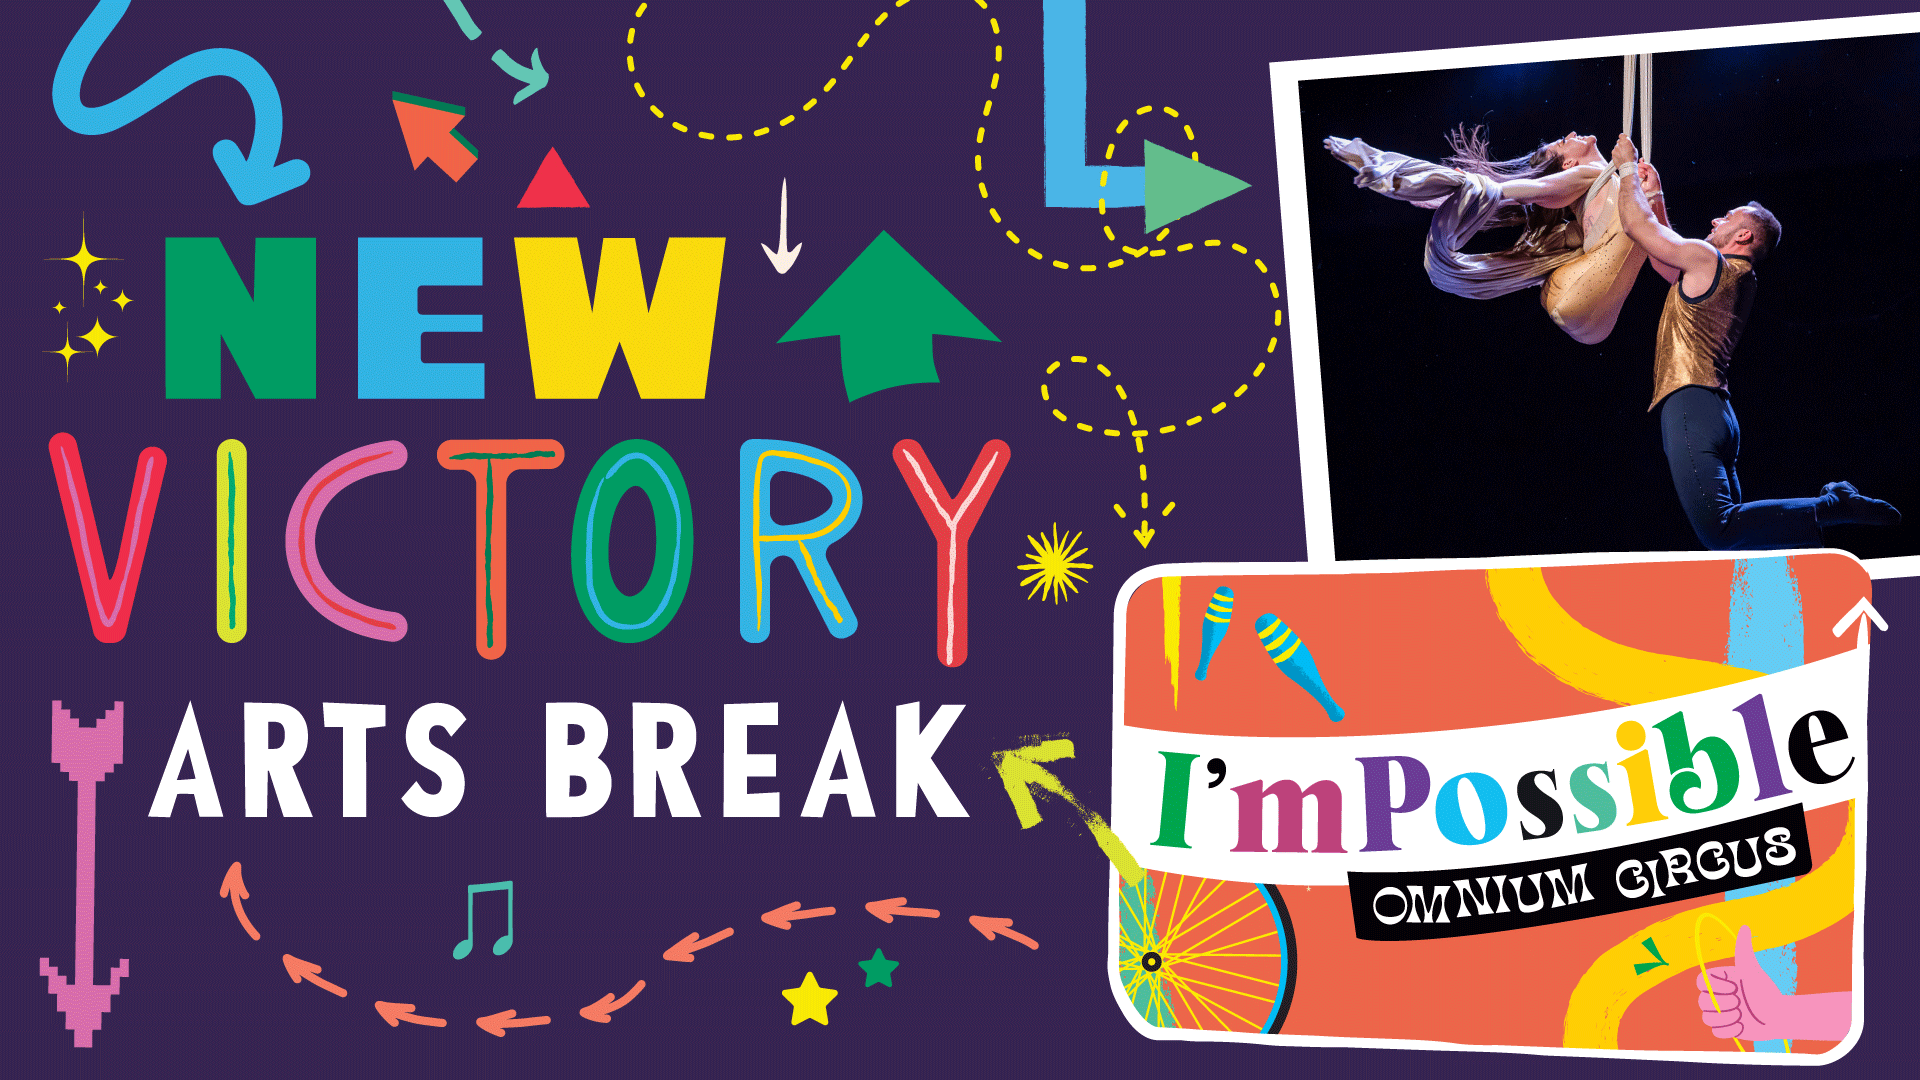 Colorful arrows surround a photo of two aerialists, one without legs, and an illustrated title that reads New Victory Arts Break: I'mPossible, the latter portion illustrated in letters of different colors surrounded by juggling pins, spoked wheels and a thumbs up.